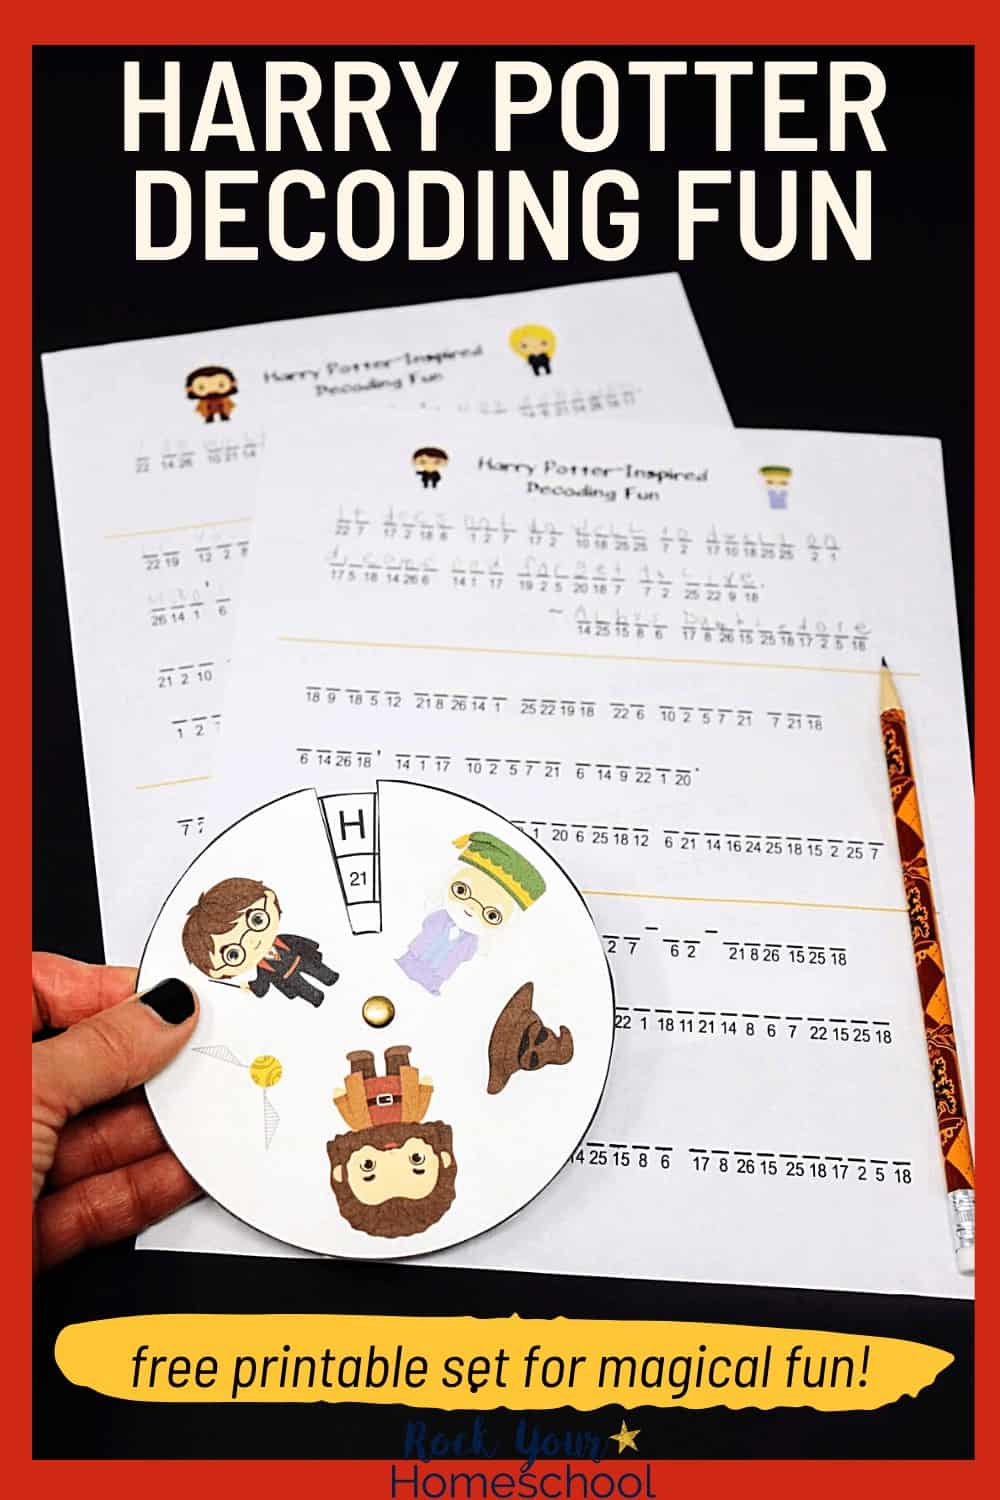 Free Harry Potter-Inspired Decoder Fun Printables